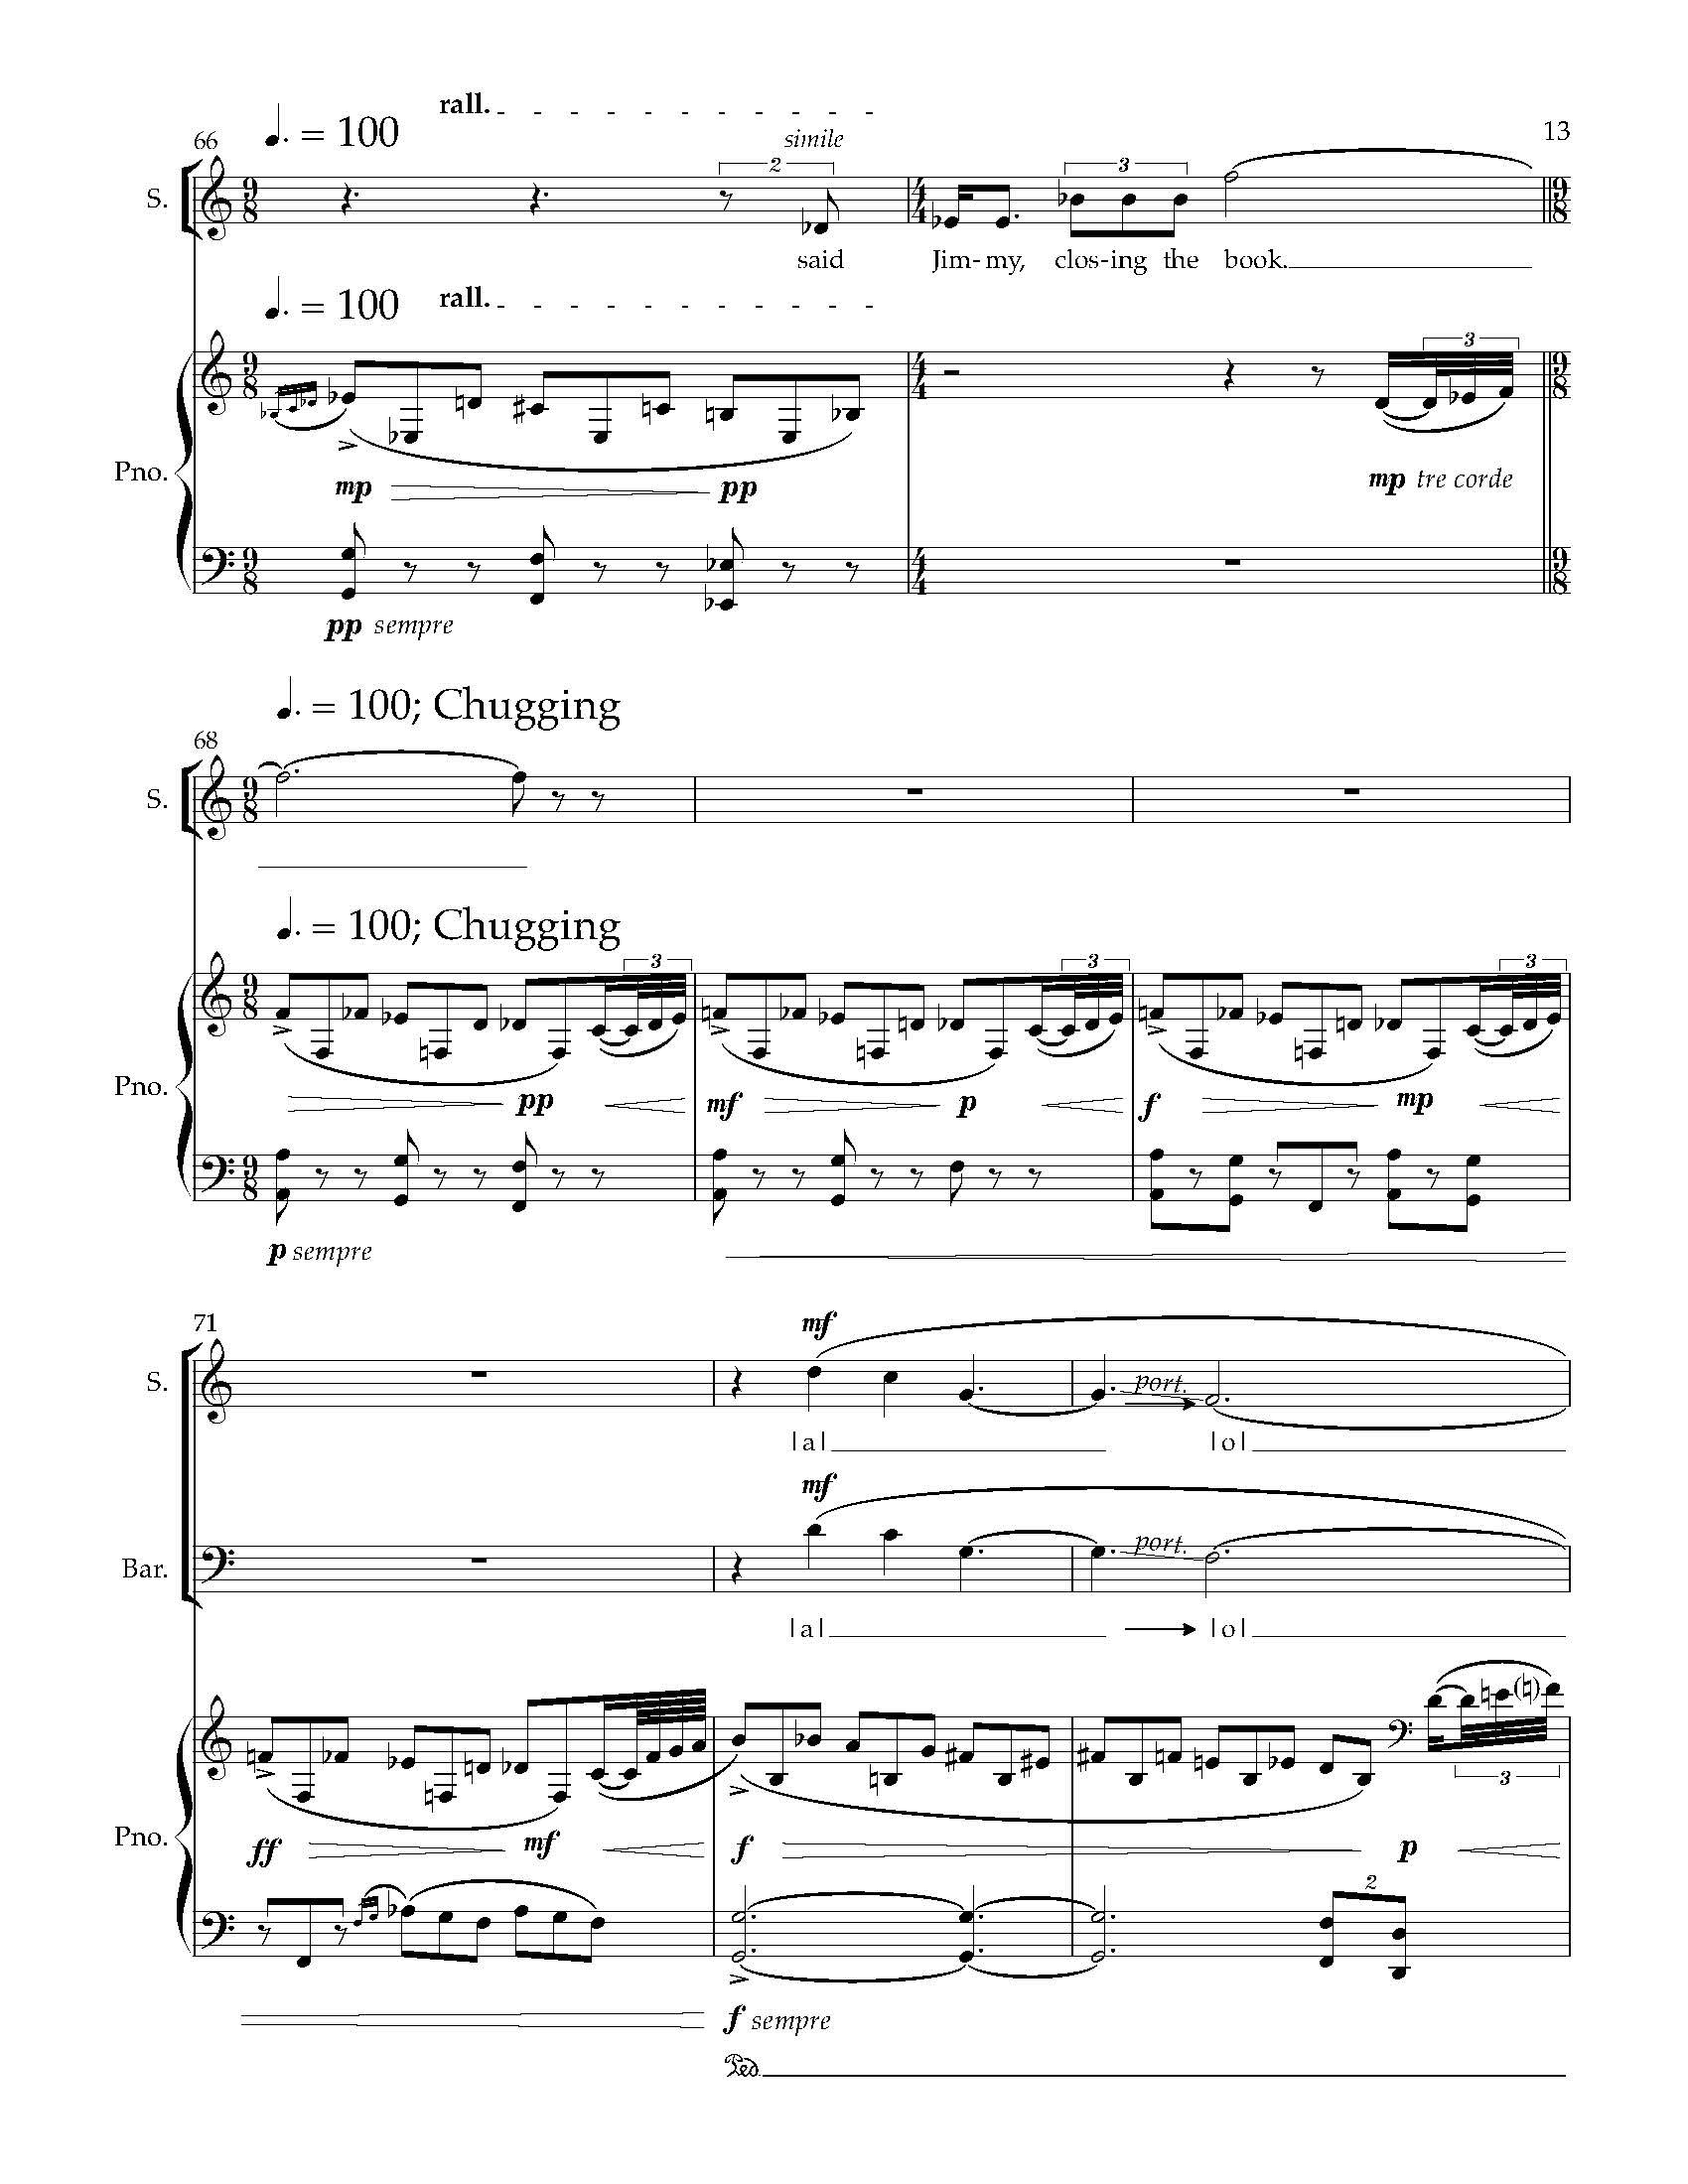 Sky - Complete Score (Revised)_Page_19.jpg